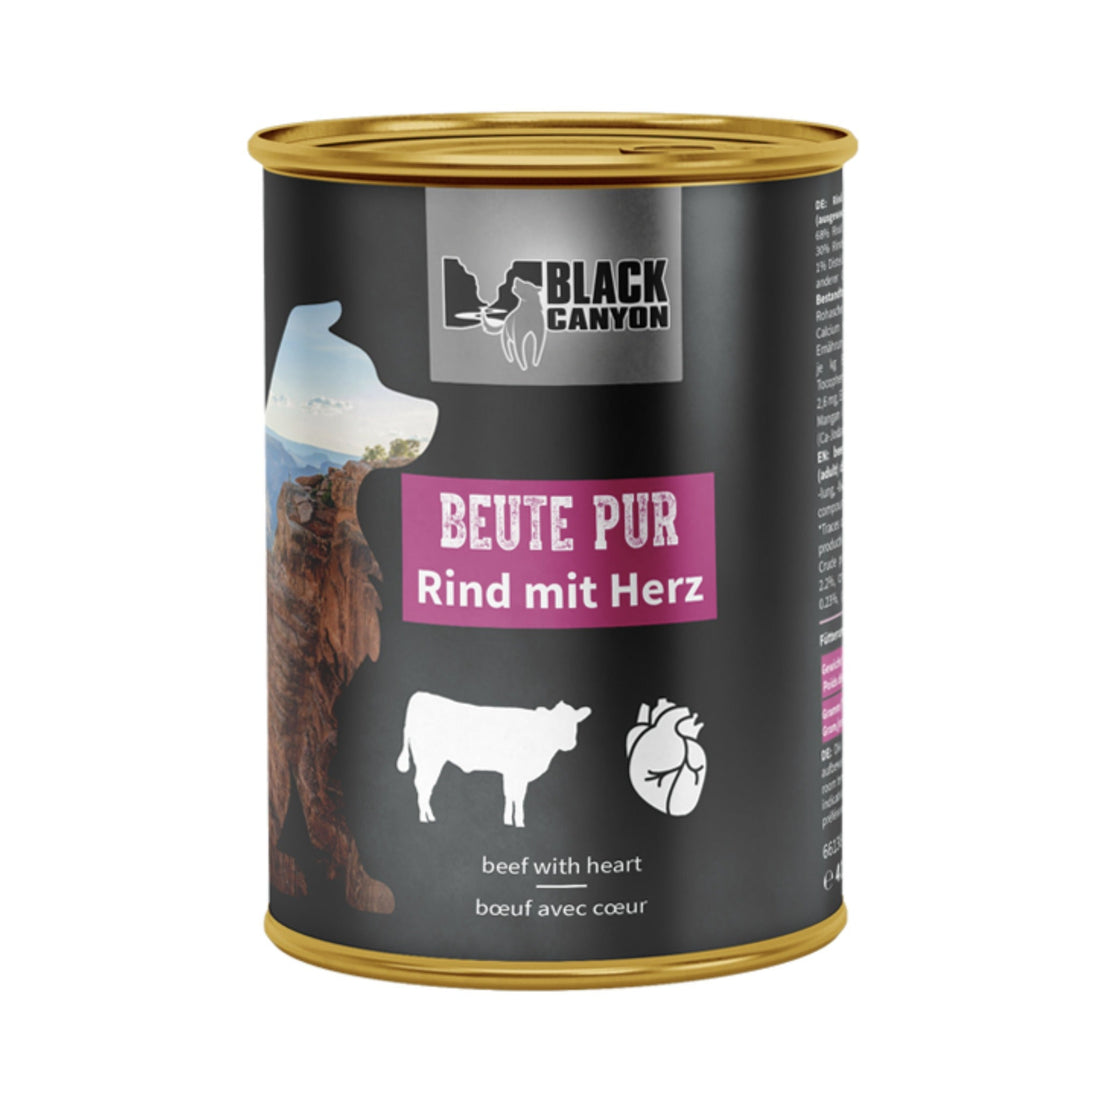 Black Canyon Beute Pur - Rind mit Herz, Hunde Nassfutter - Woofshack